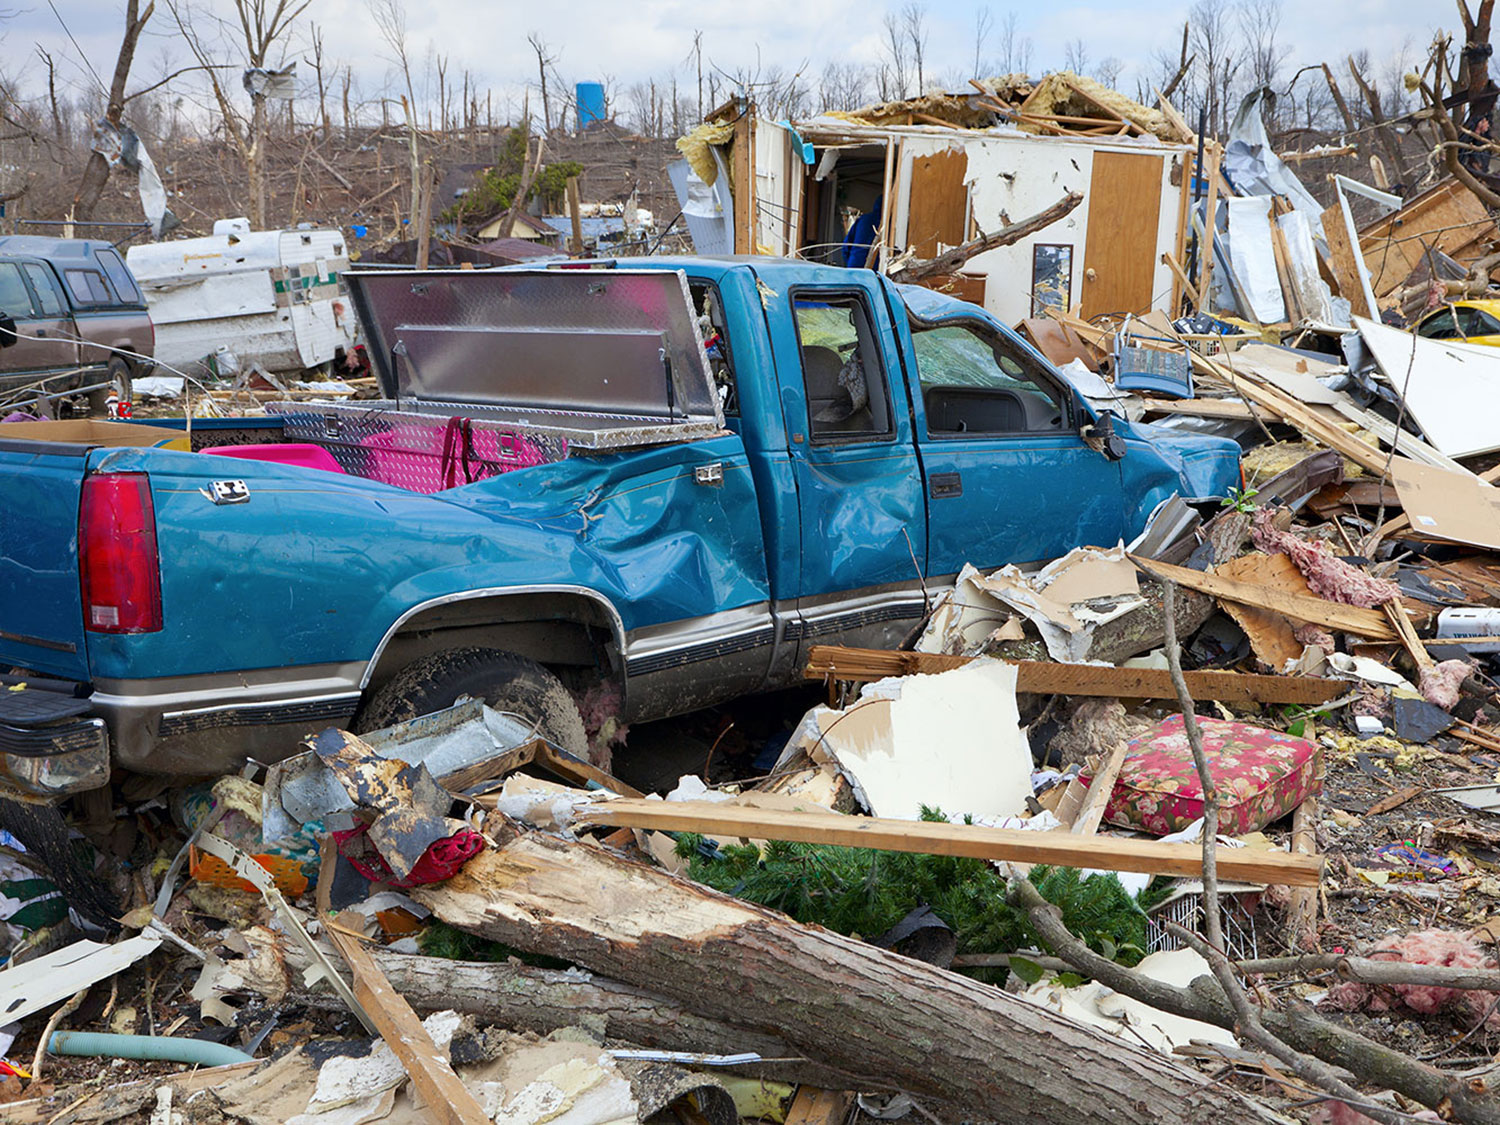 Texas gets more tornadoes than any other state most years. Your first priority is to make sure your family is safe when a tornado threatens. There are also steps you can take to prepare your home for these dangerous storms.